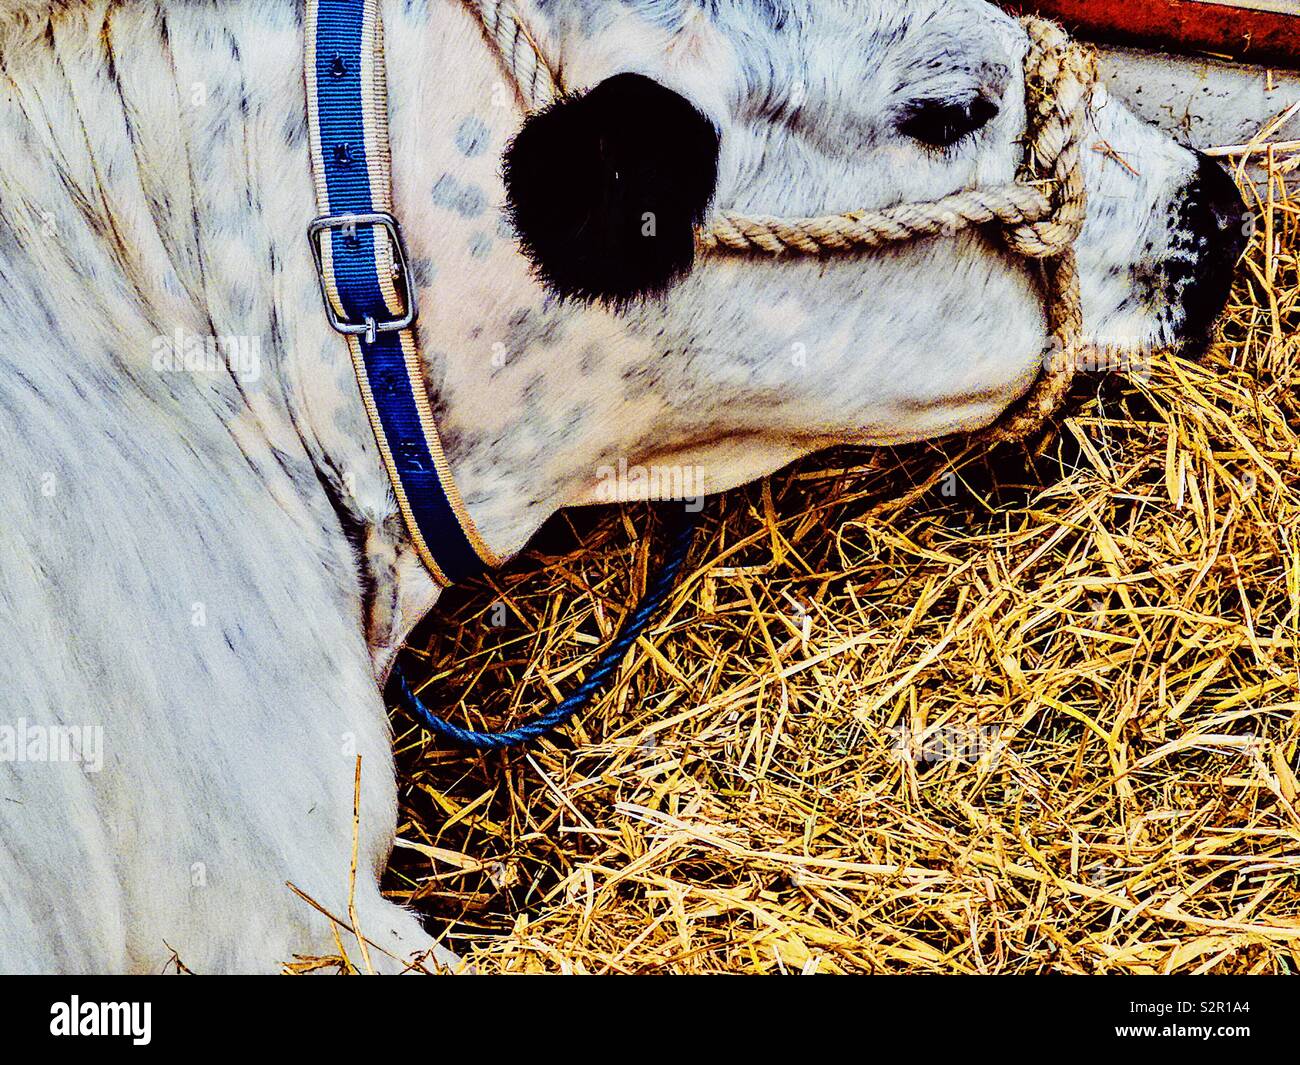 British White cow with blue collar and halter Stock Photo